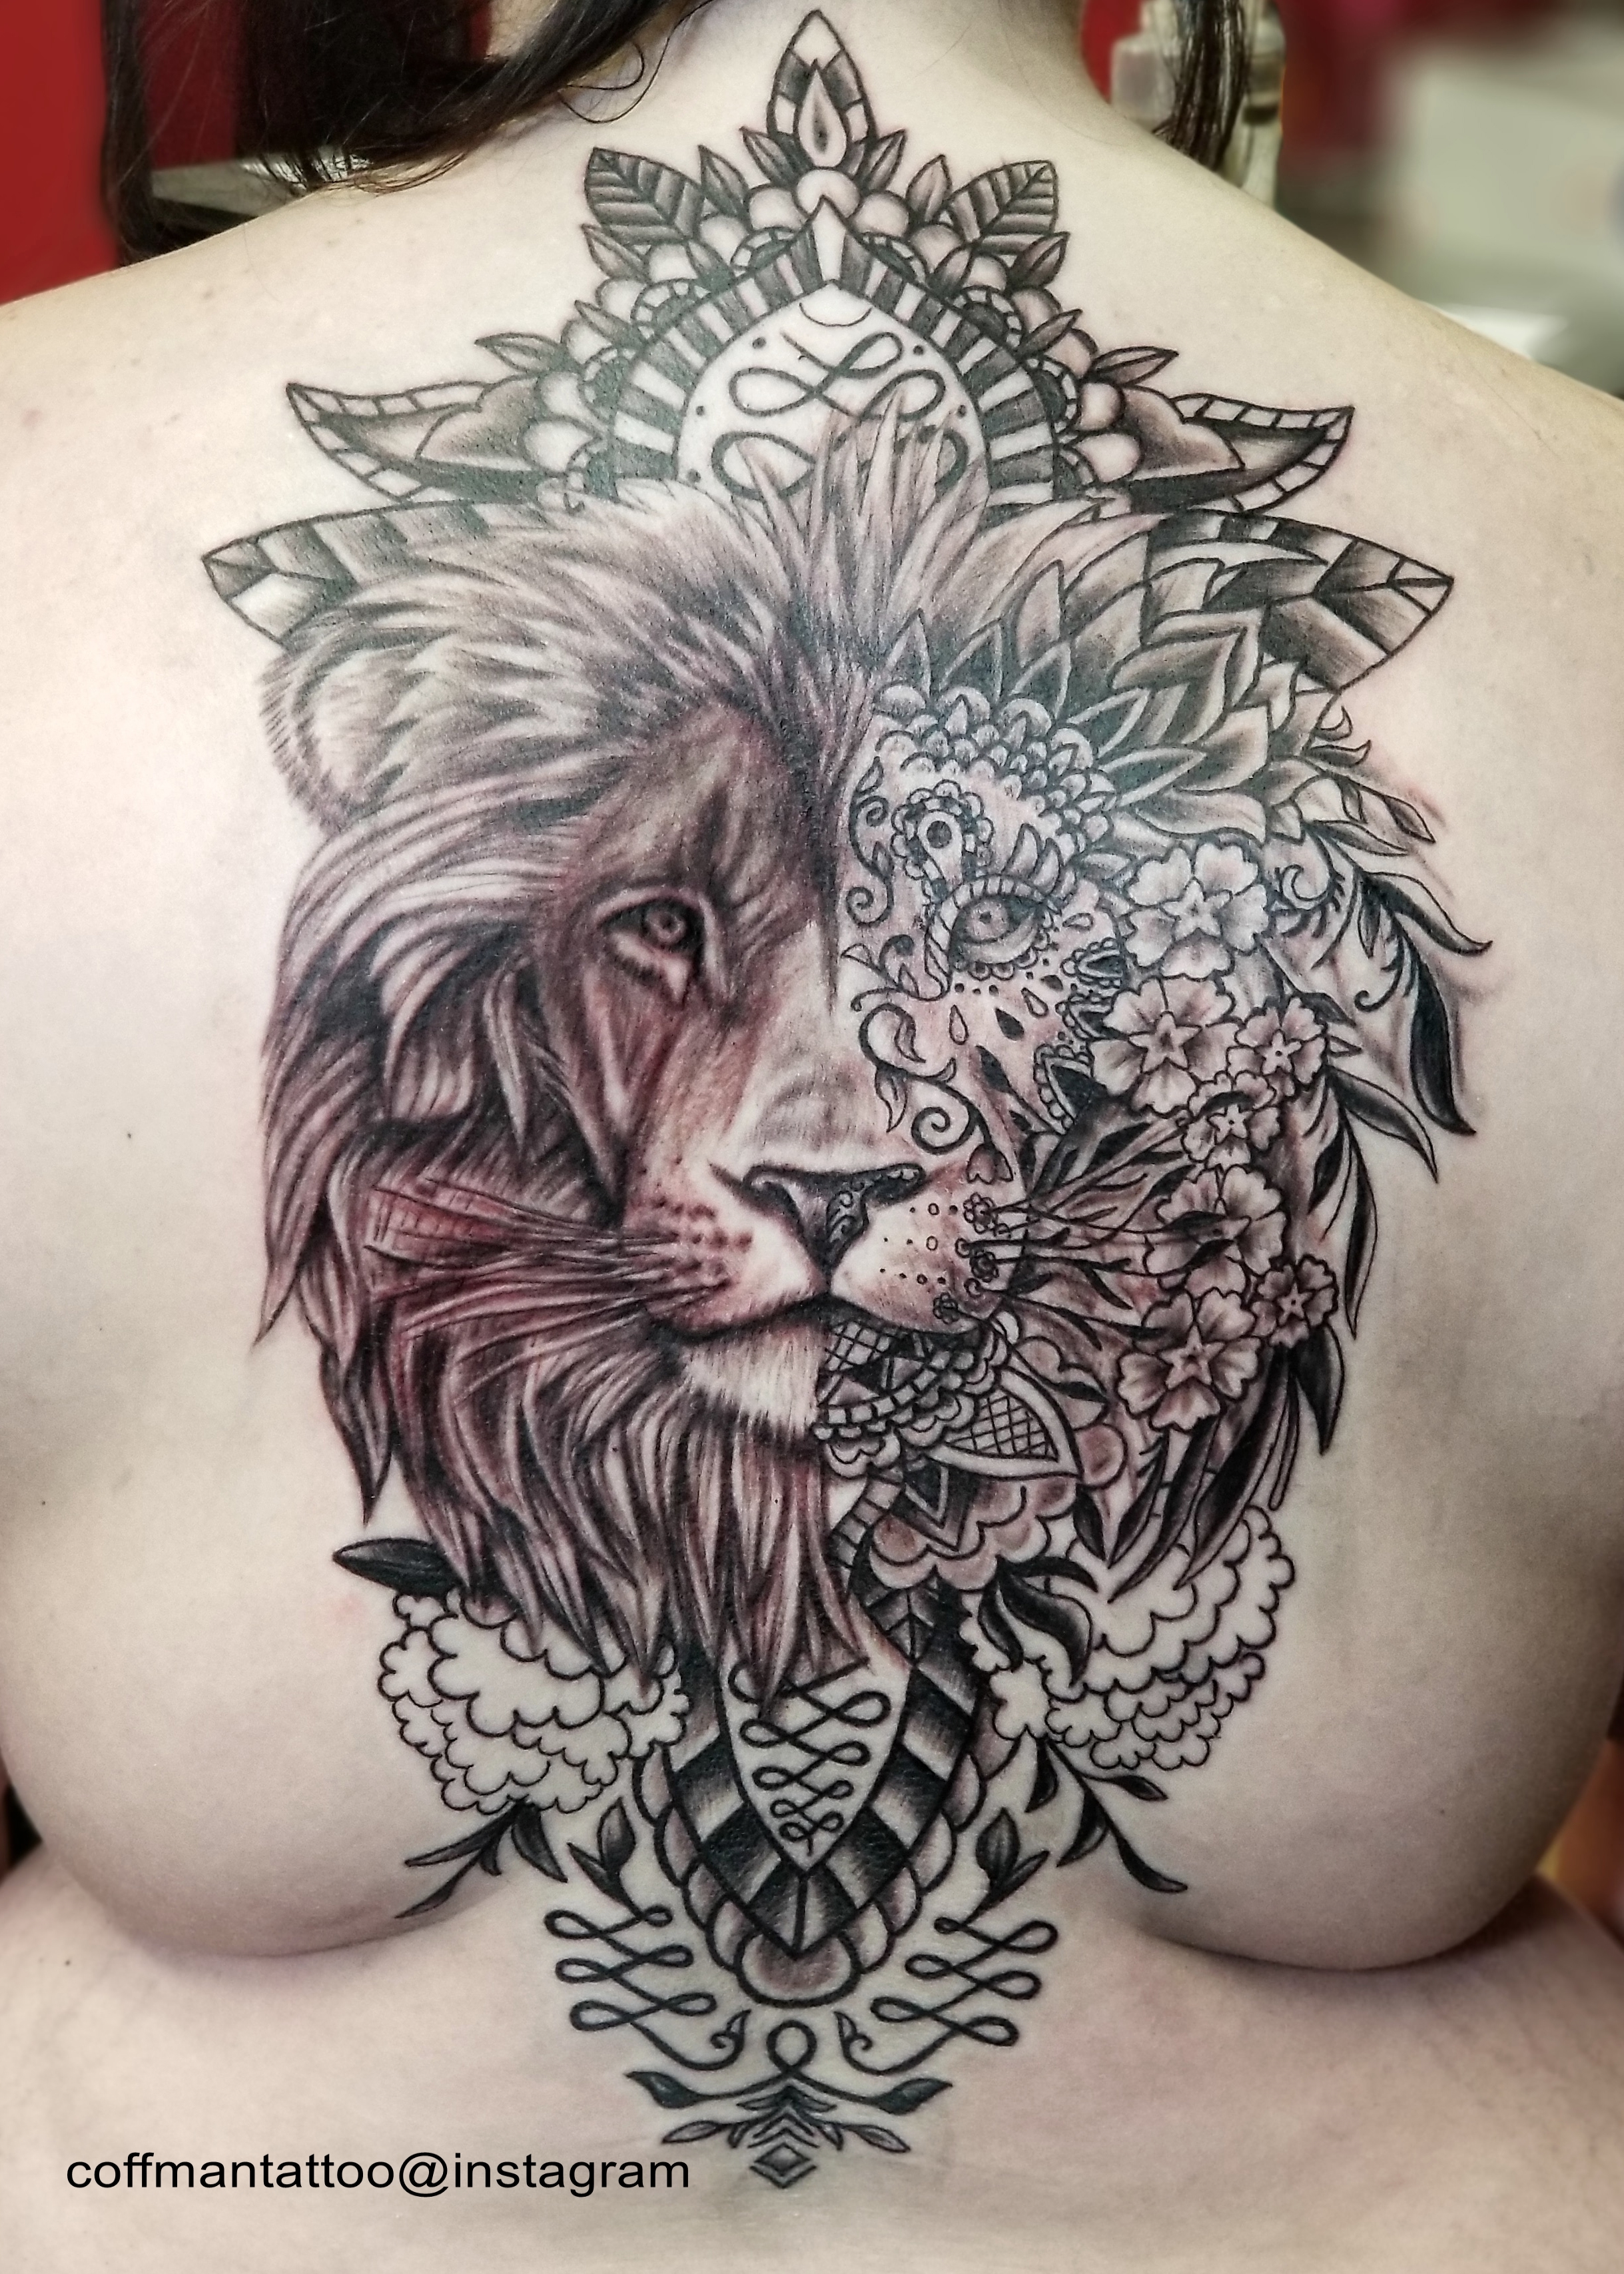 47 Amazing and Magnificent Lion Tattoos Ideas and Design for Hand